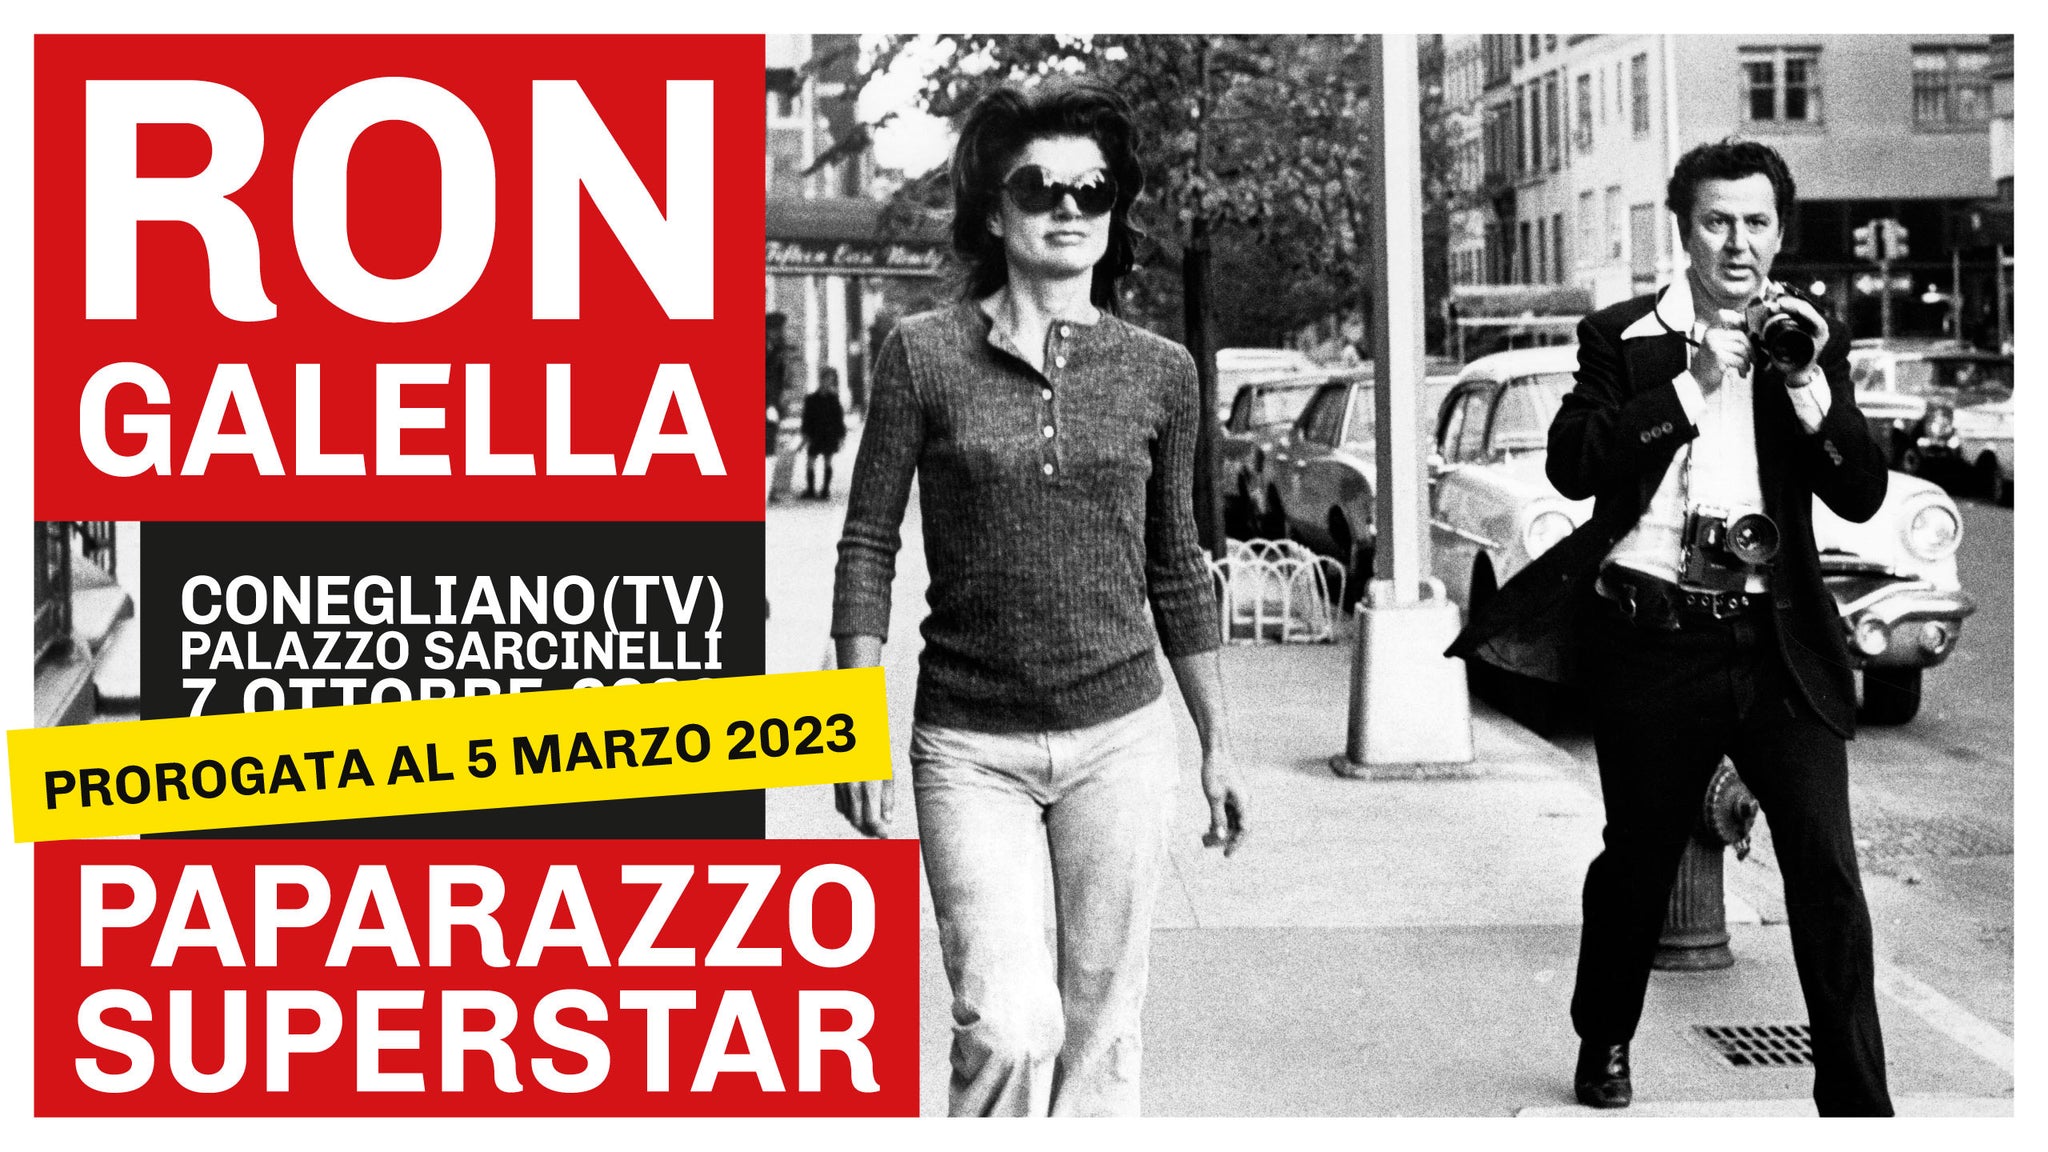 Ron Galella Paparazzo Superstar extension March 5th